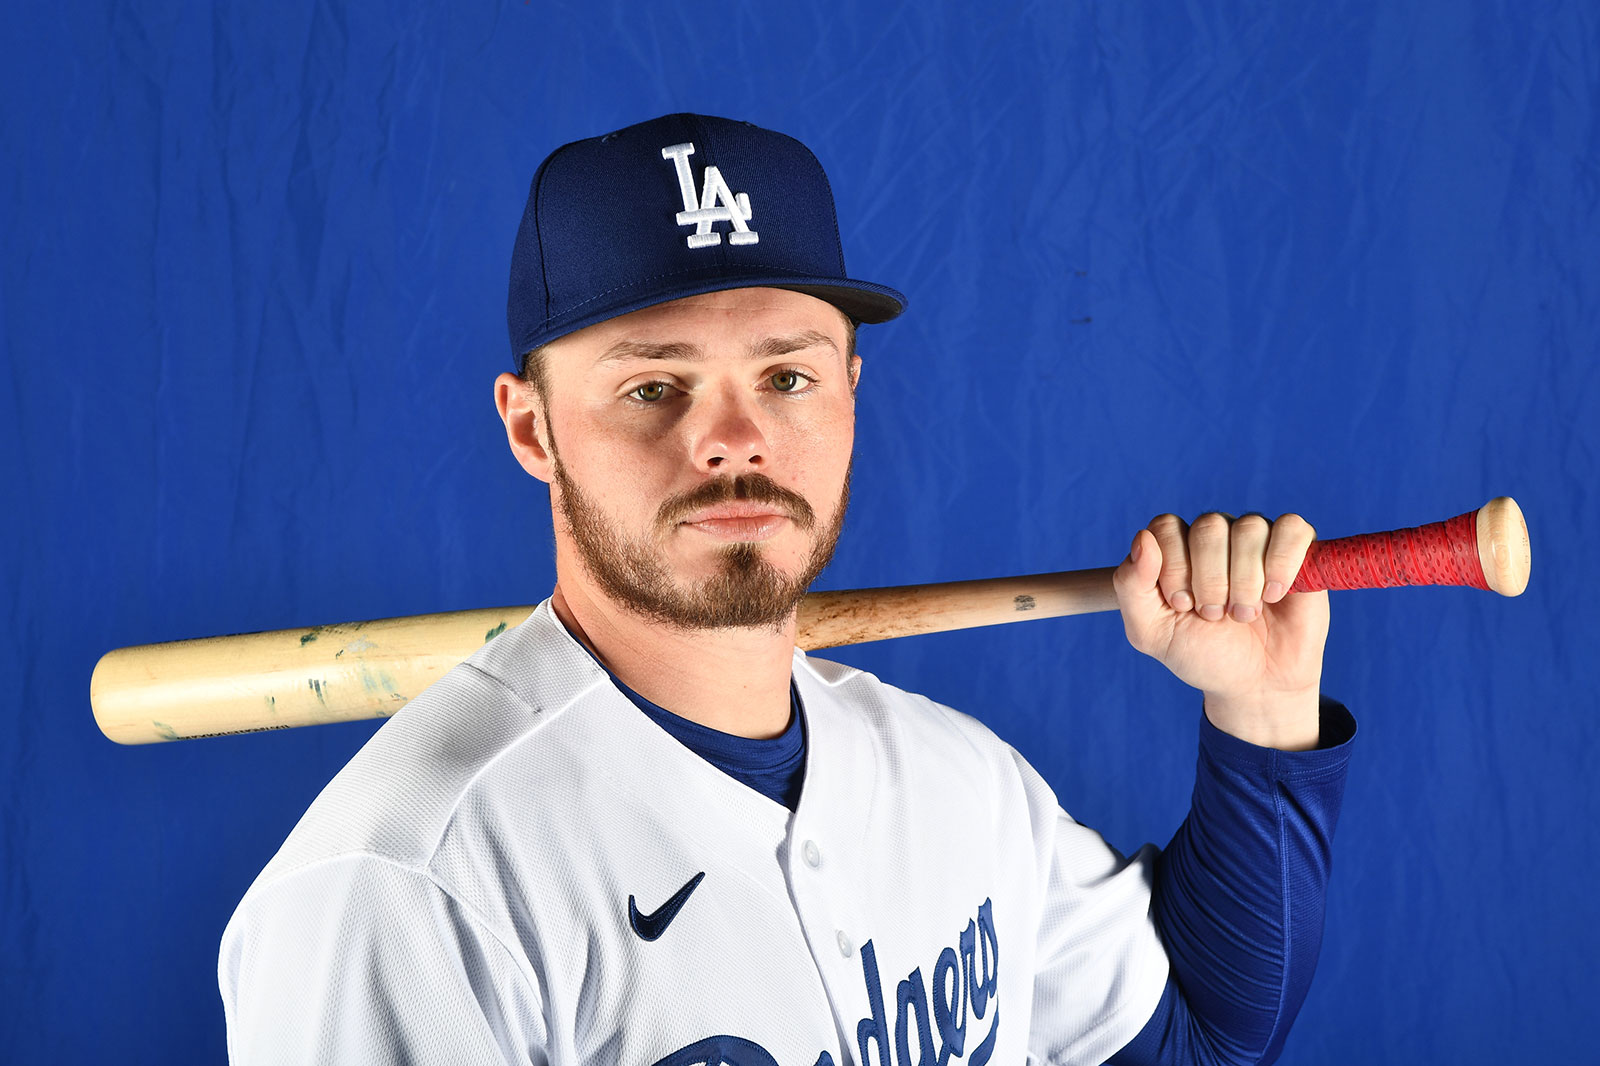 MLB The Show' Players League: Gavin Lux reps video game Dodgers